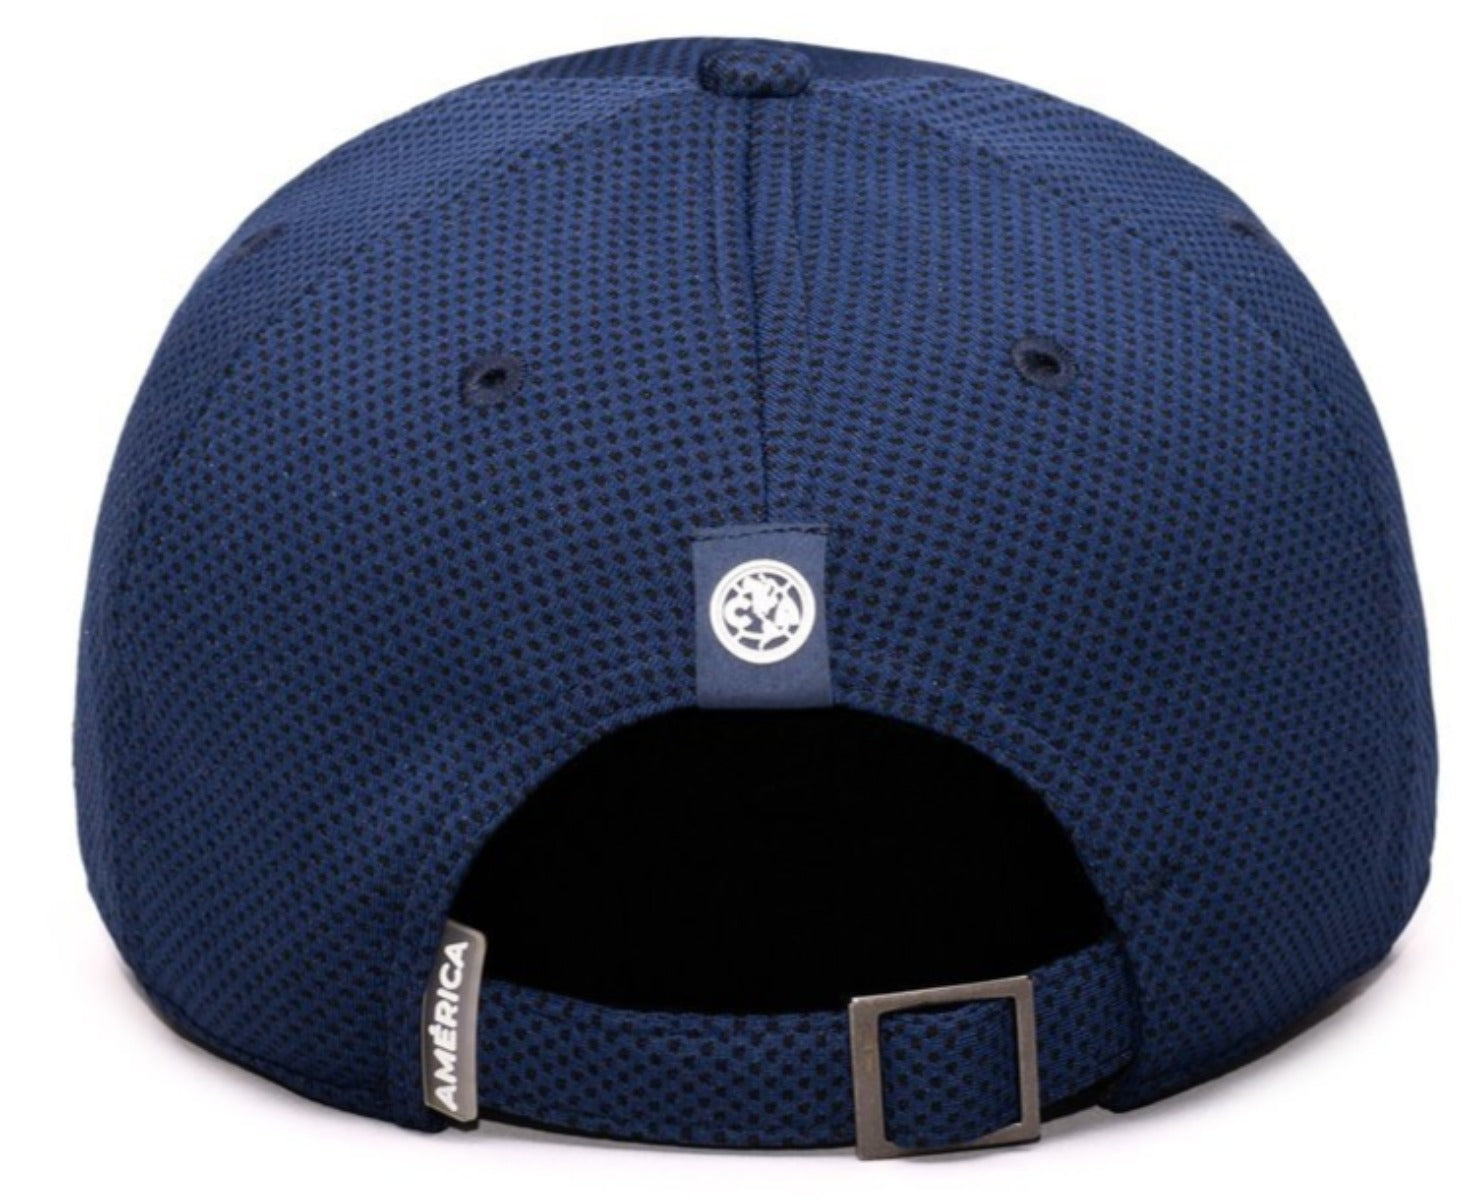 FI COLLECTIONS CLUB AMERICA TROPHY ADJUSTABLE HAT-NAVY/BLACK